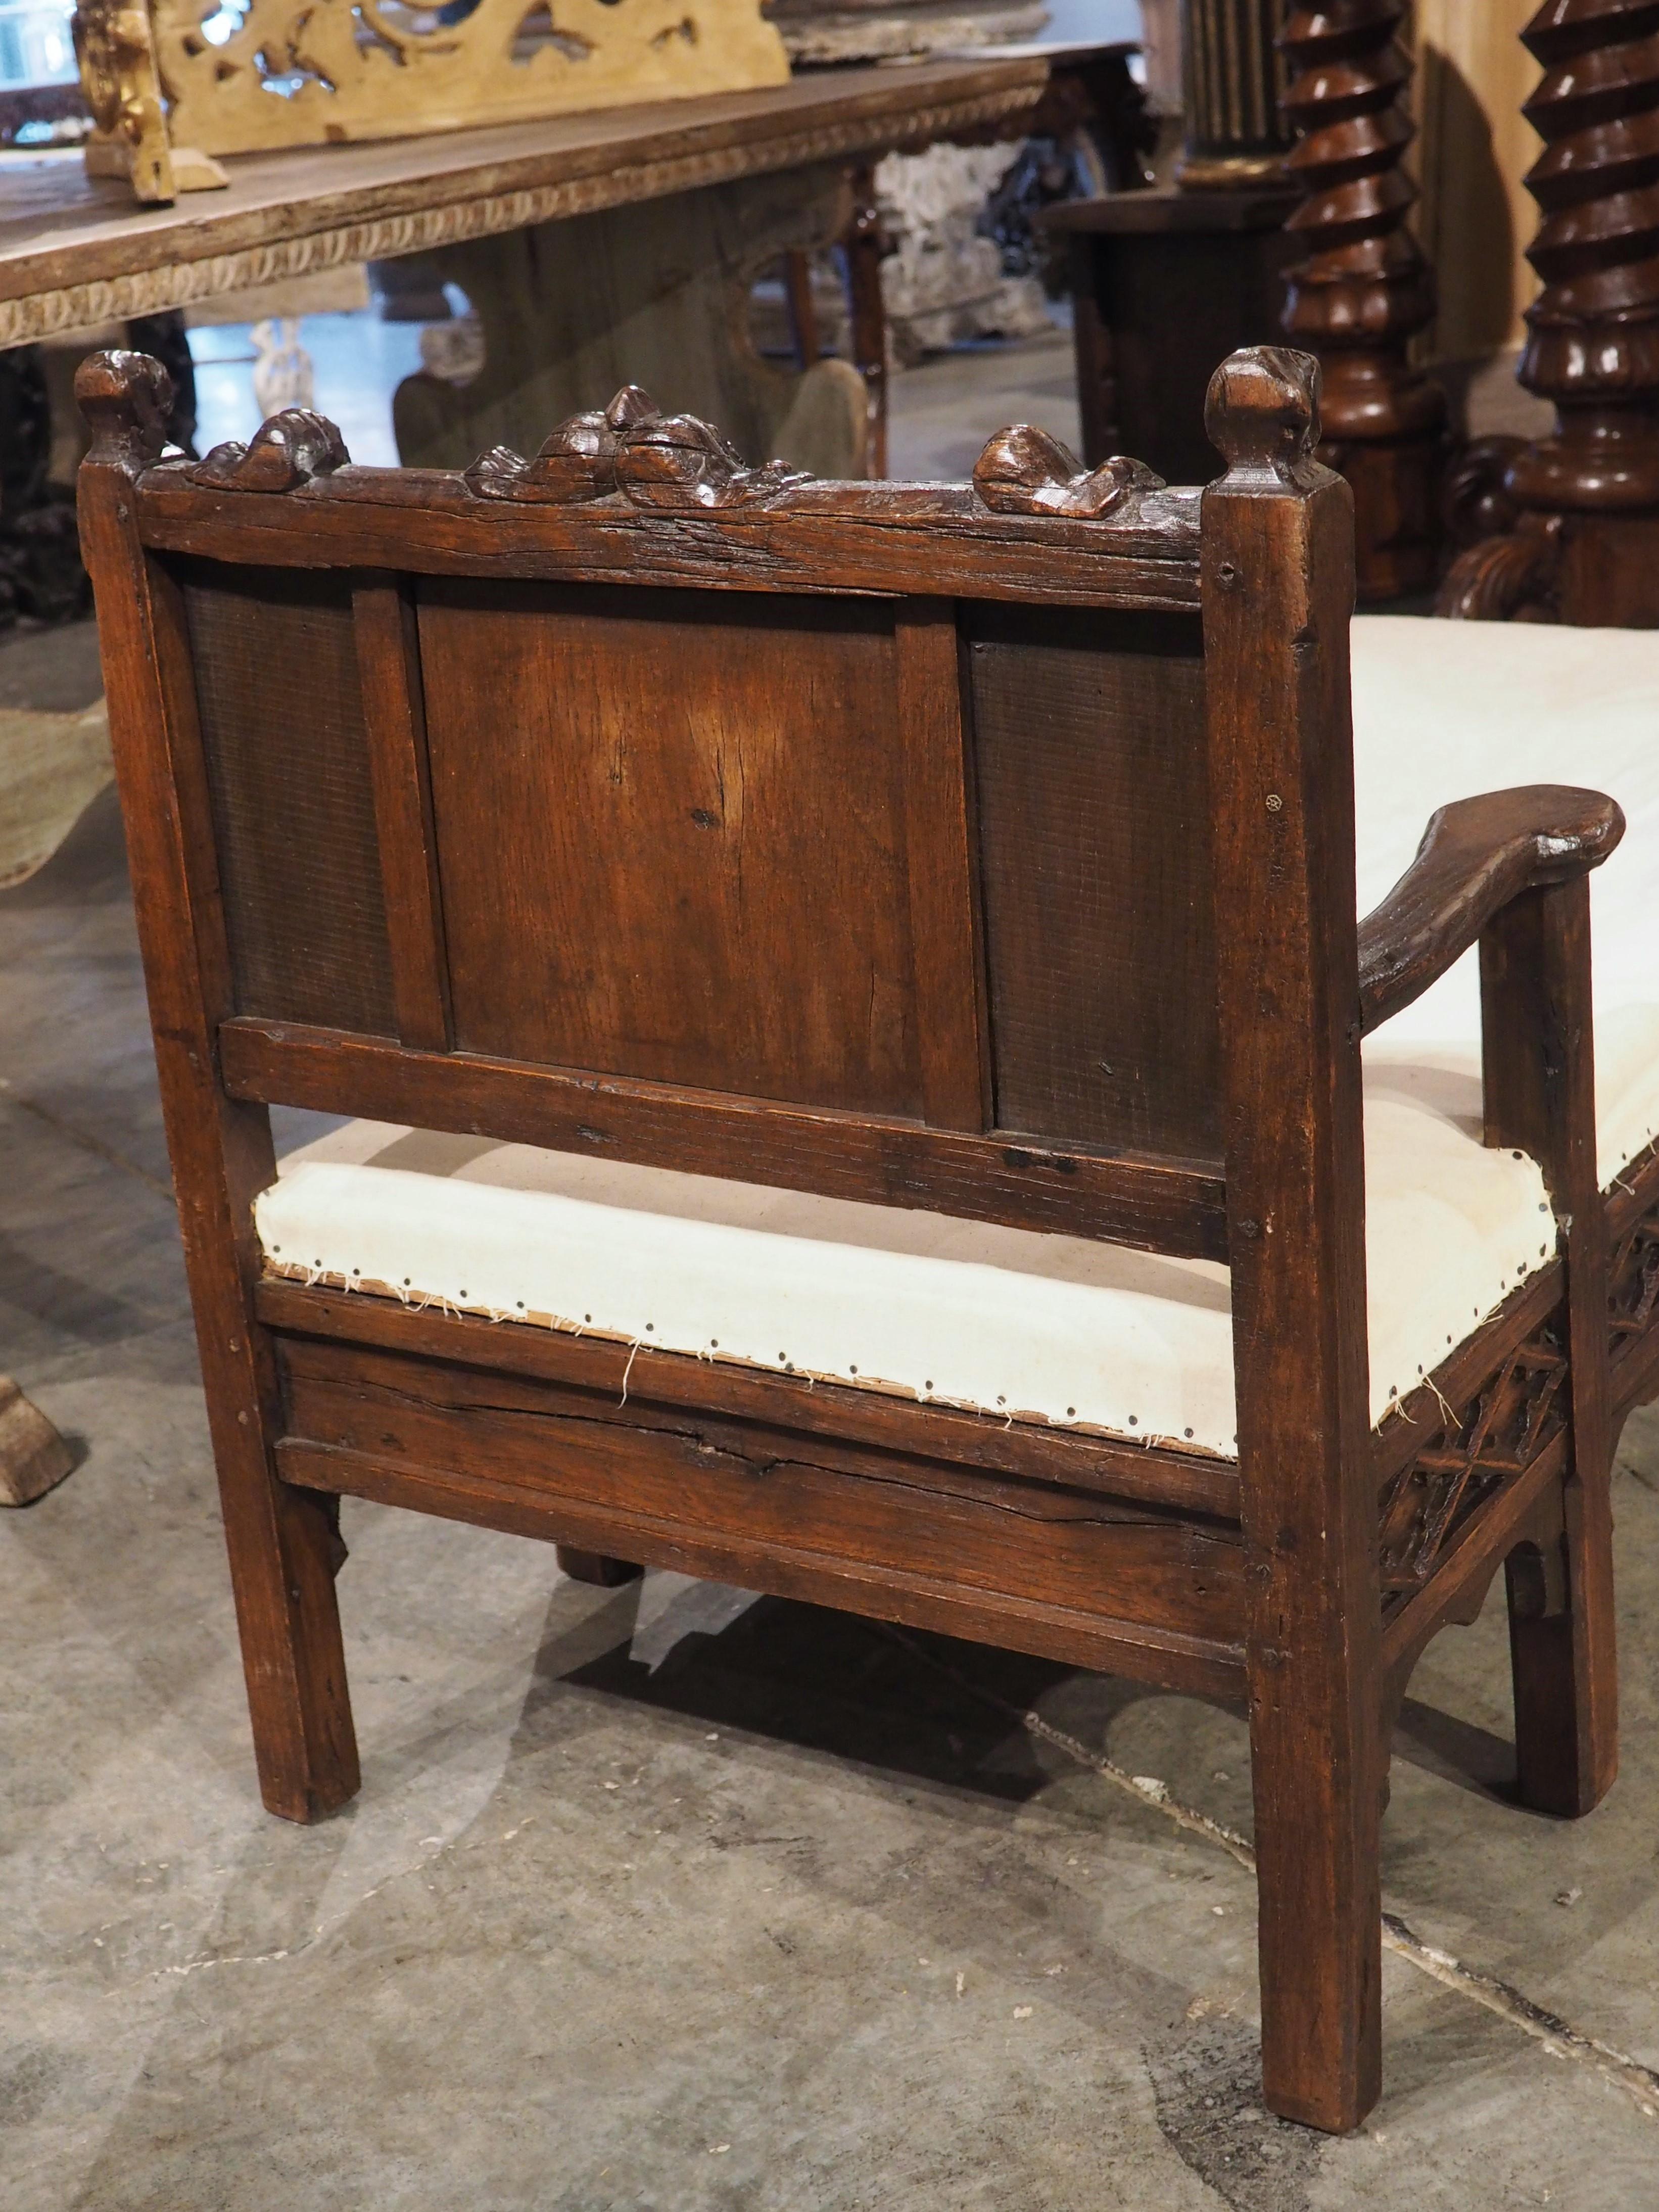 In the 18th and 19th centuries, it was not uncommon for skilled craftsmen to repurpose older wood carvings into their own furniture creations. A French menuisier utilized this technique (circa 1870), incorporating a previously carved chair back and